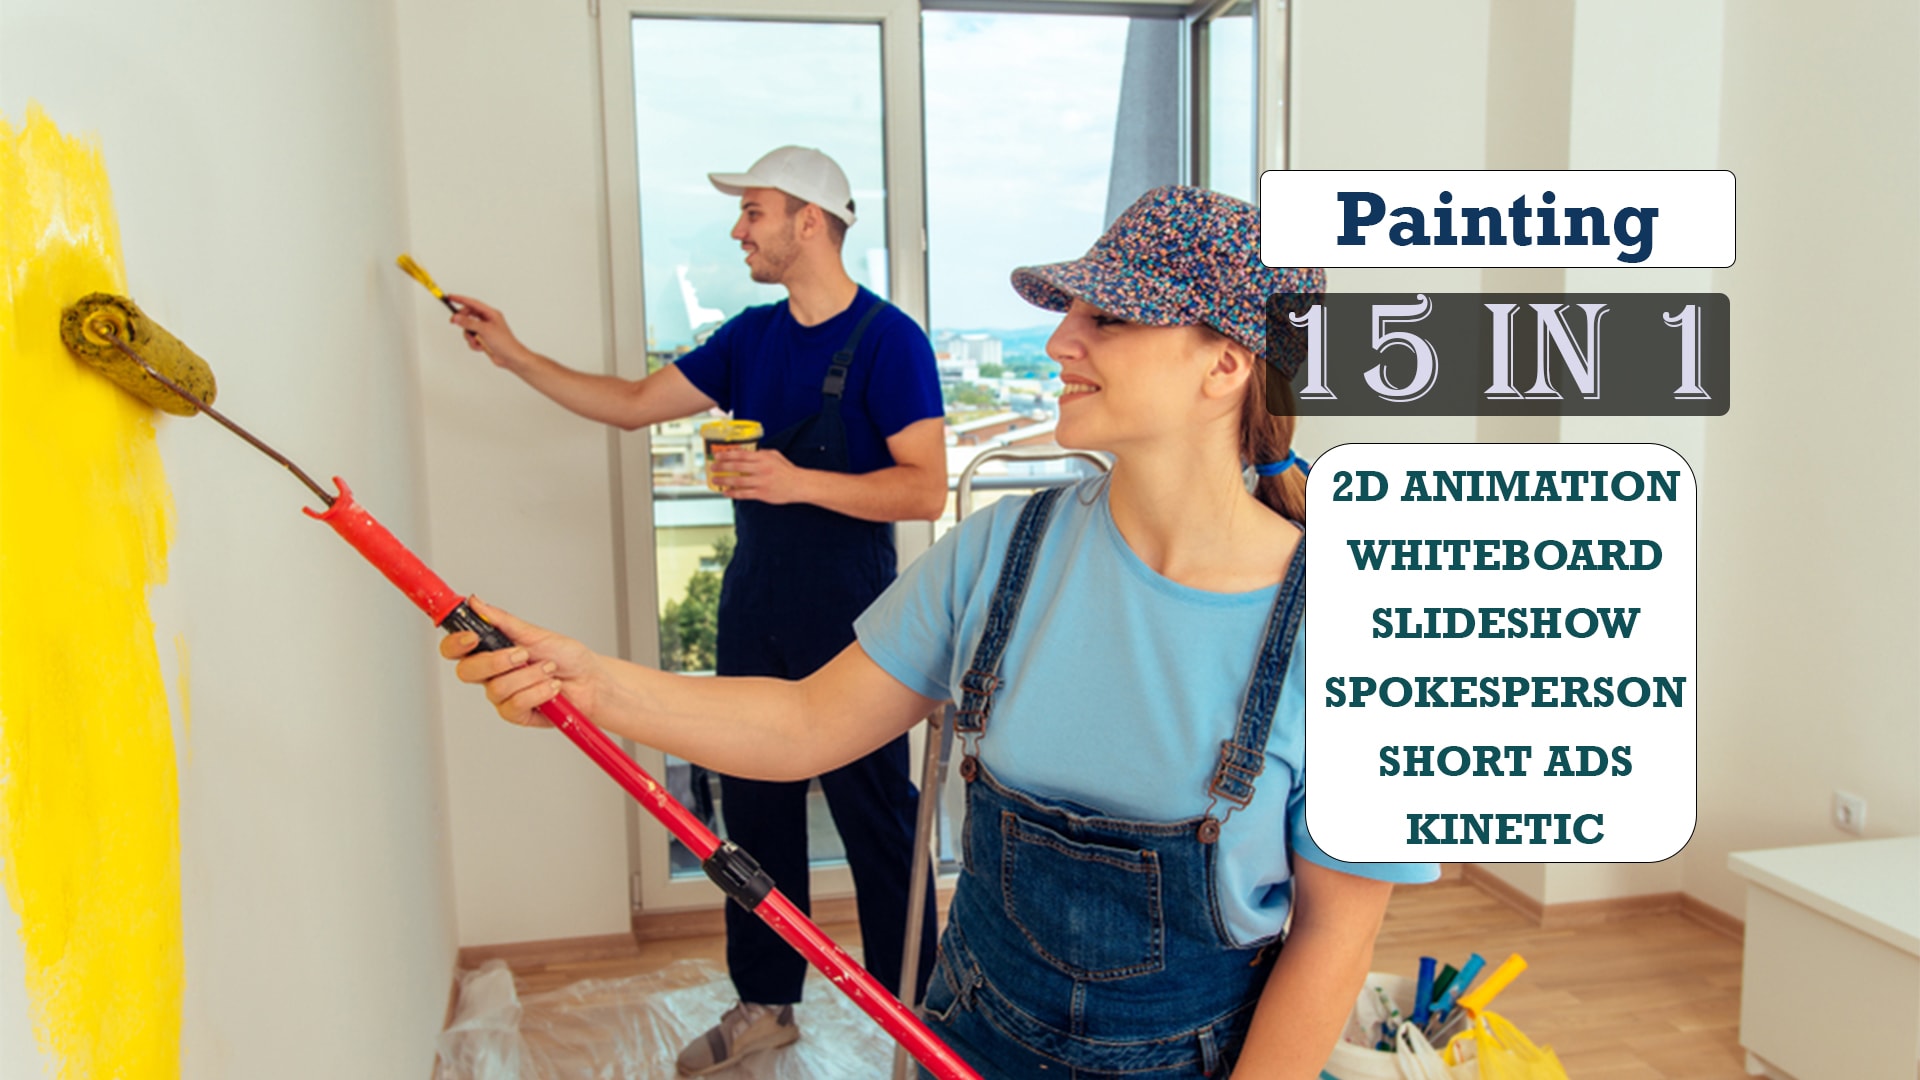 Make painting contractor or painter services promo video ad by Mosfaqur3 Fiverr